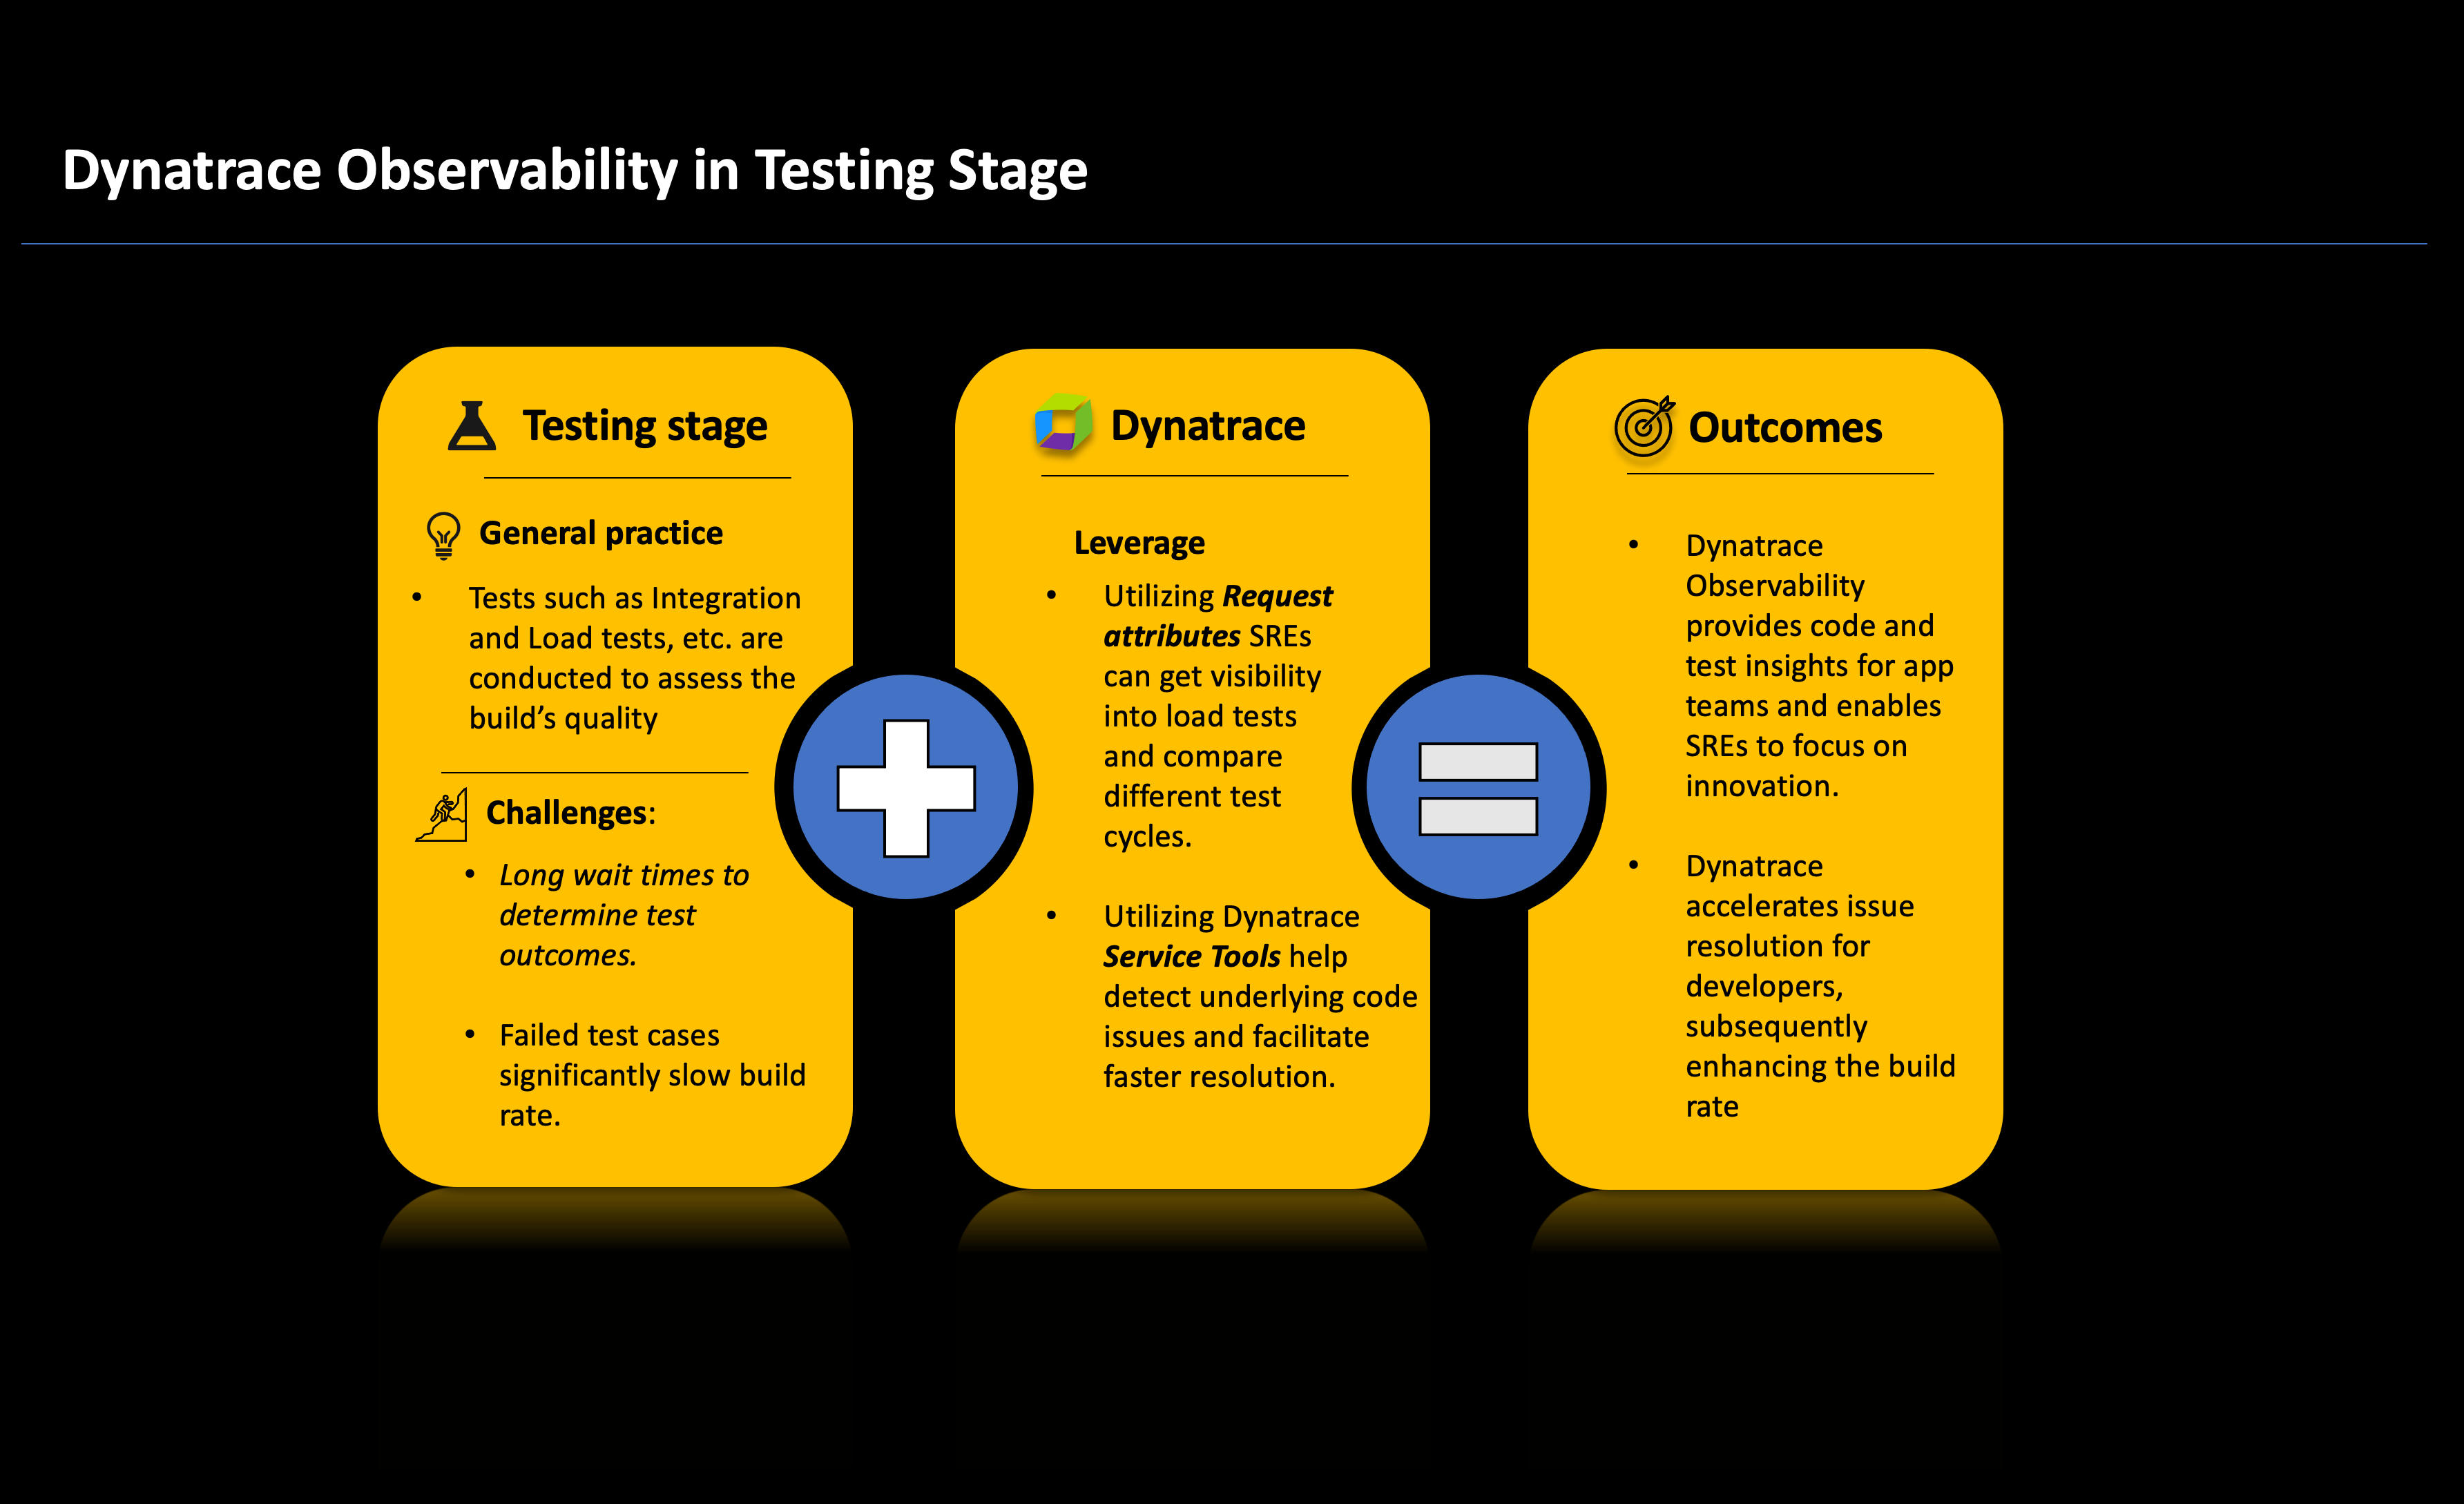 Dynatrace Observability in Testing Stage